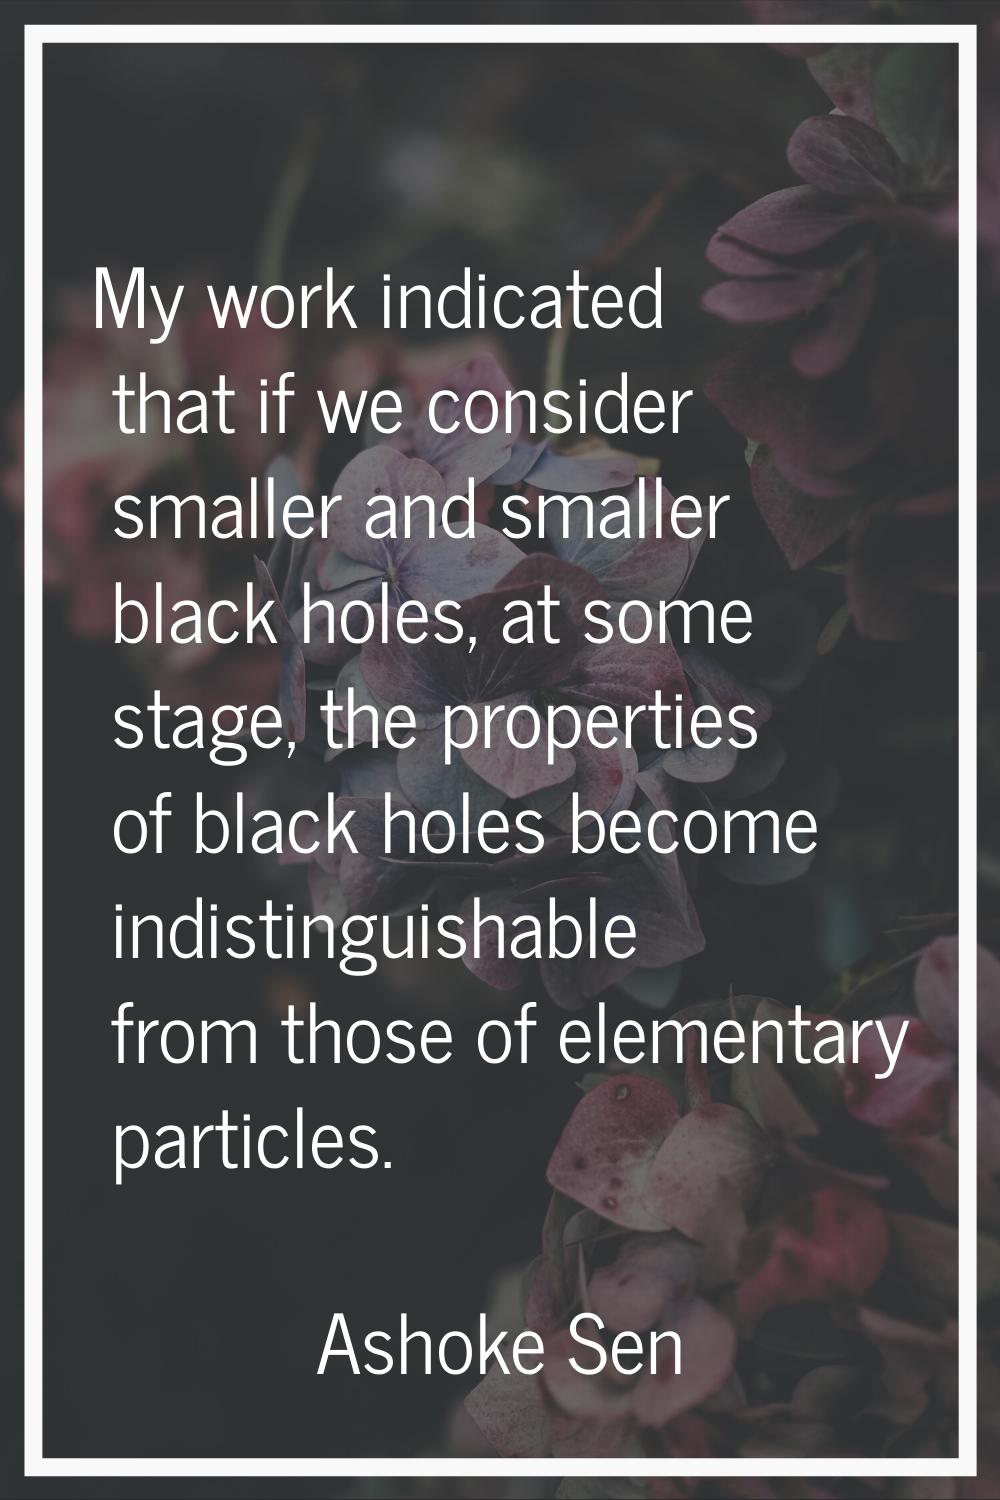 My work indicated that if we consider smaller and smaller black holes, at some stage, the propertie